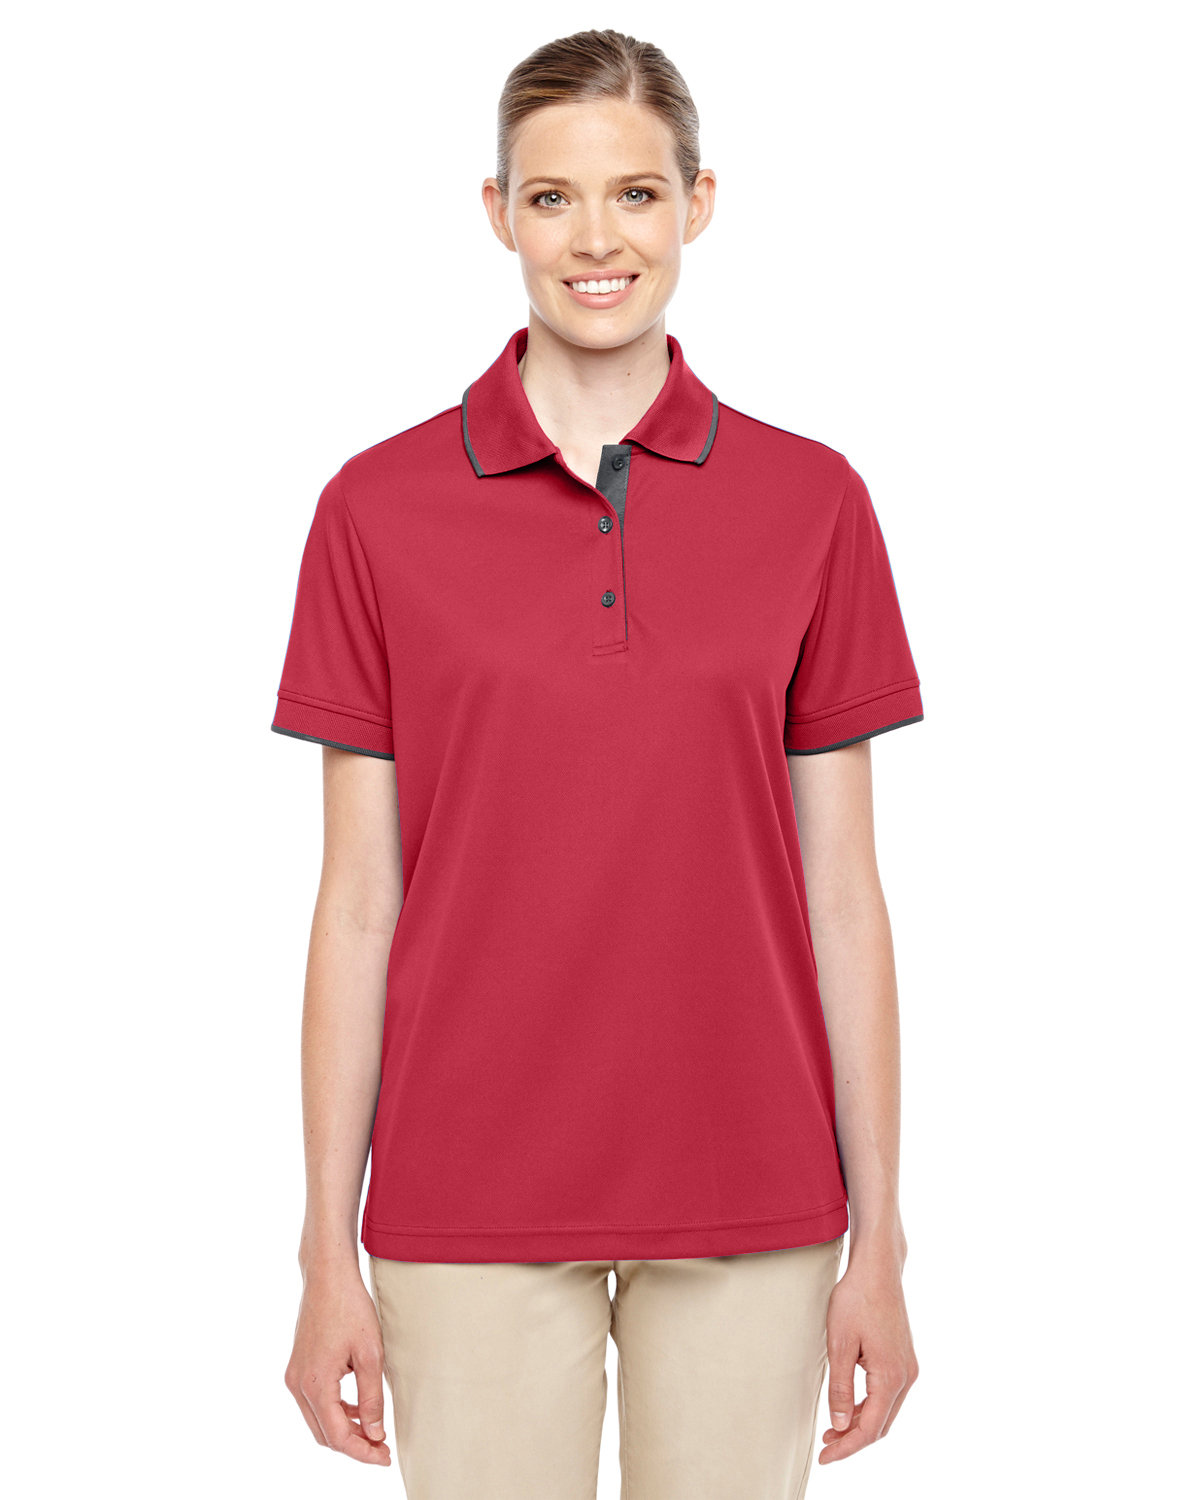 Core 365 Ladies' Motive Performance Piqué Polo with Tipped Collar CLASSC RED/ CRBN 